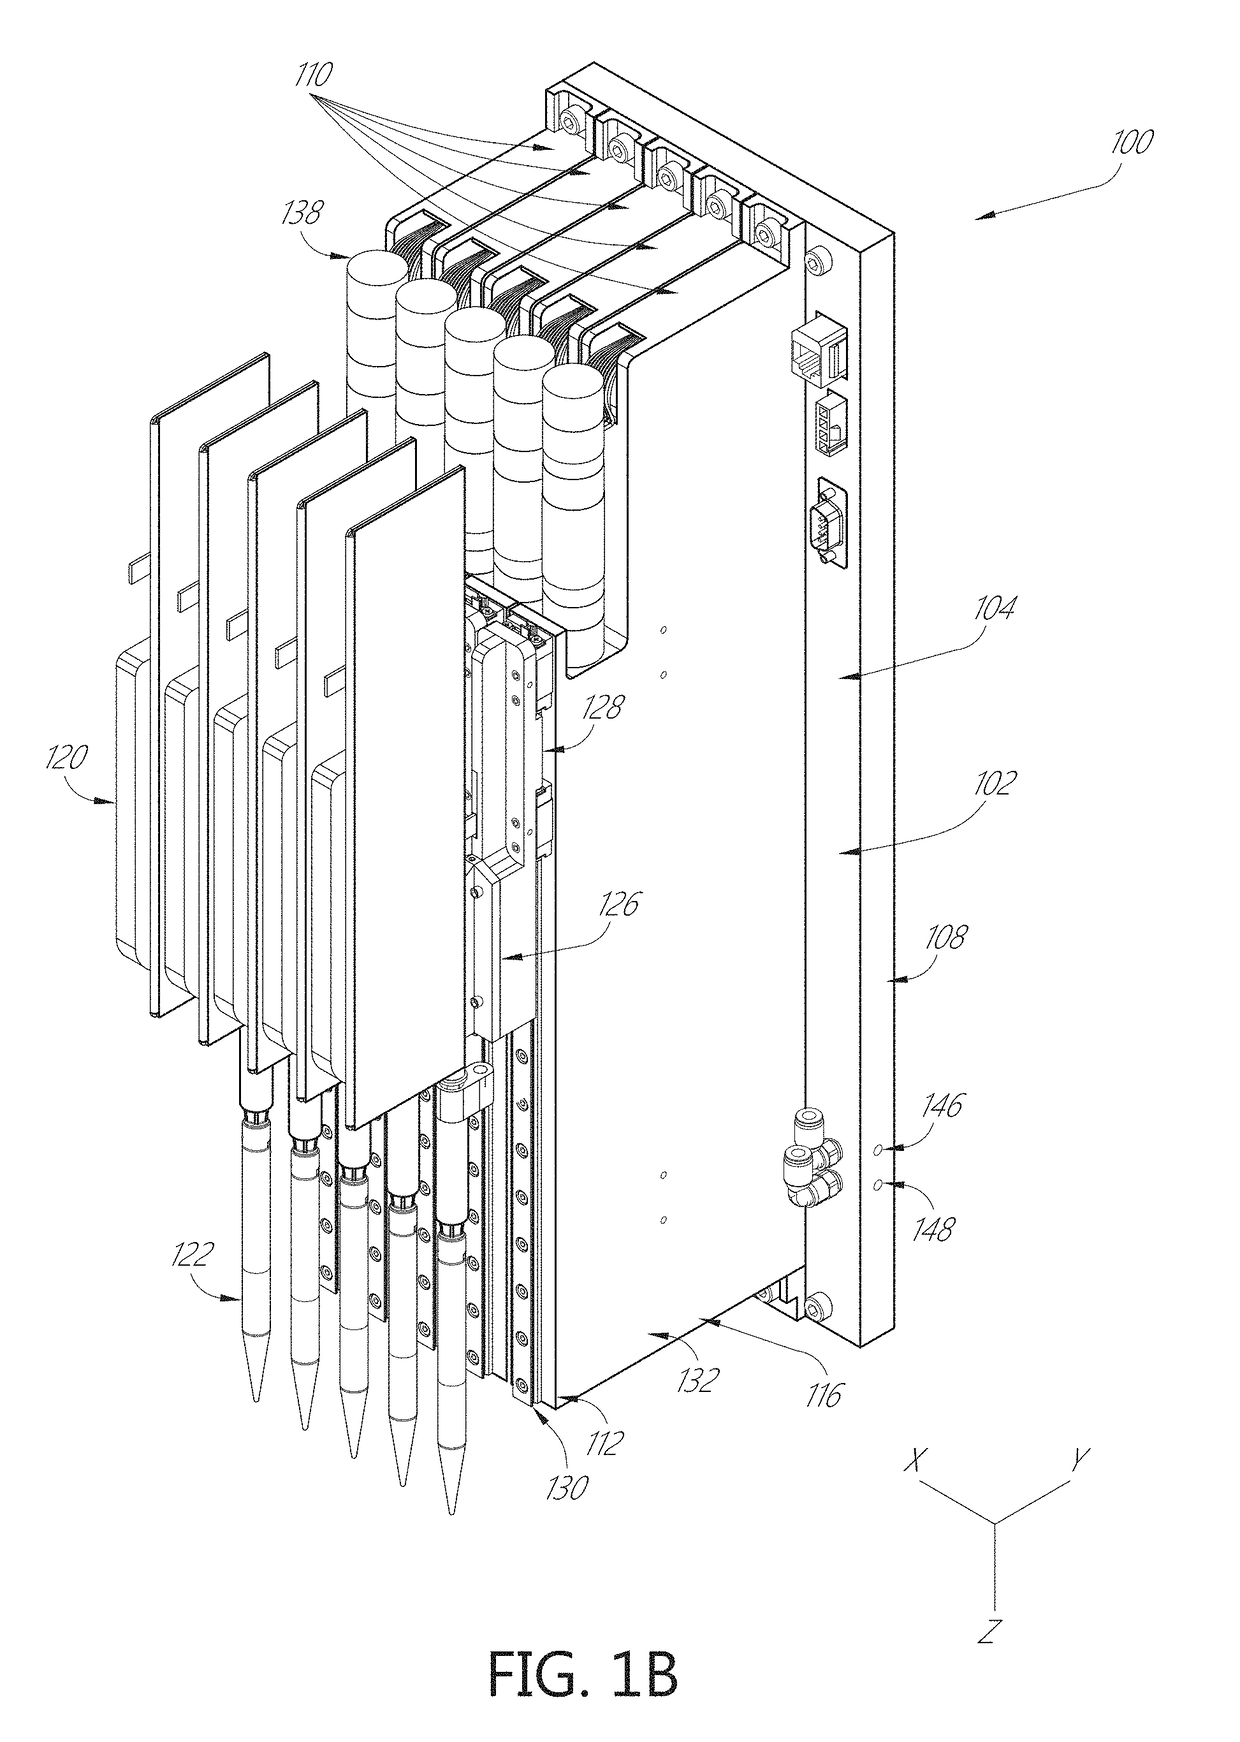 Liquid dispenser with manifold mount for modular independently-actuated pipette channels